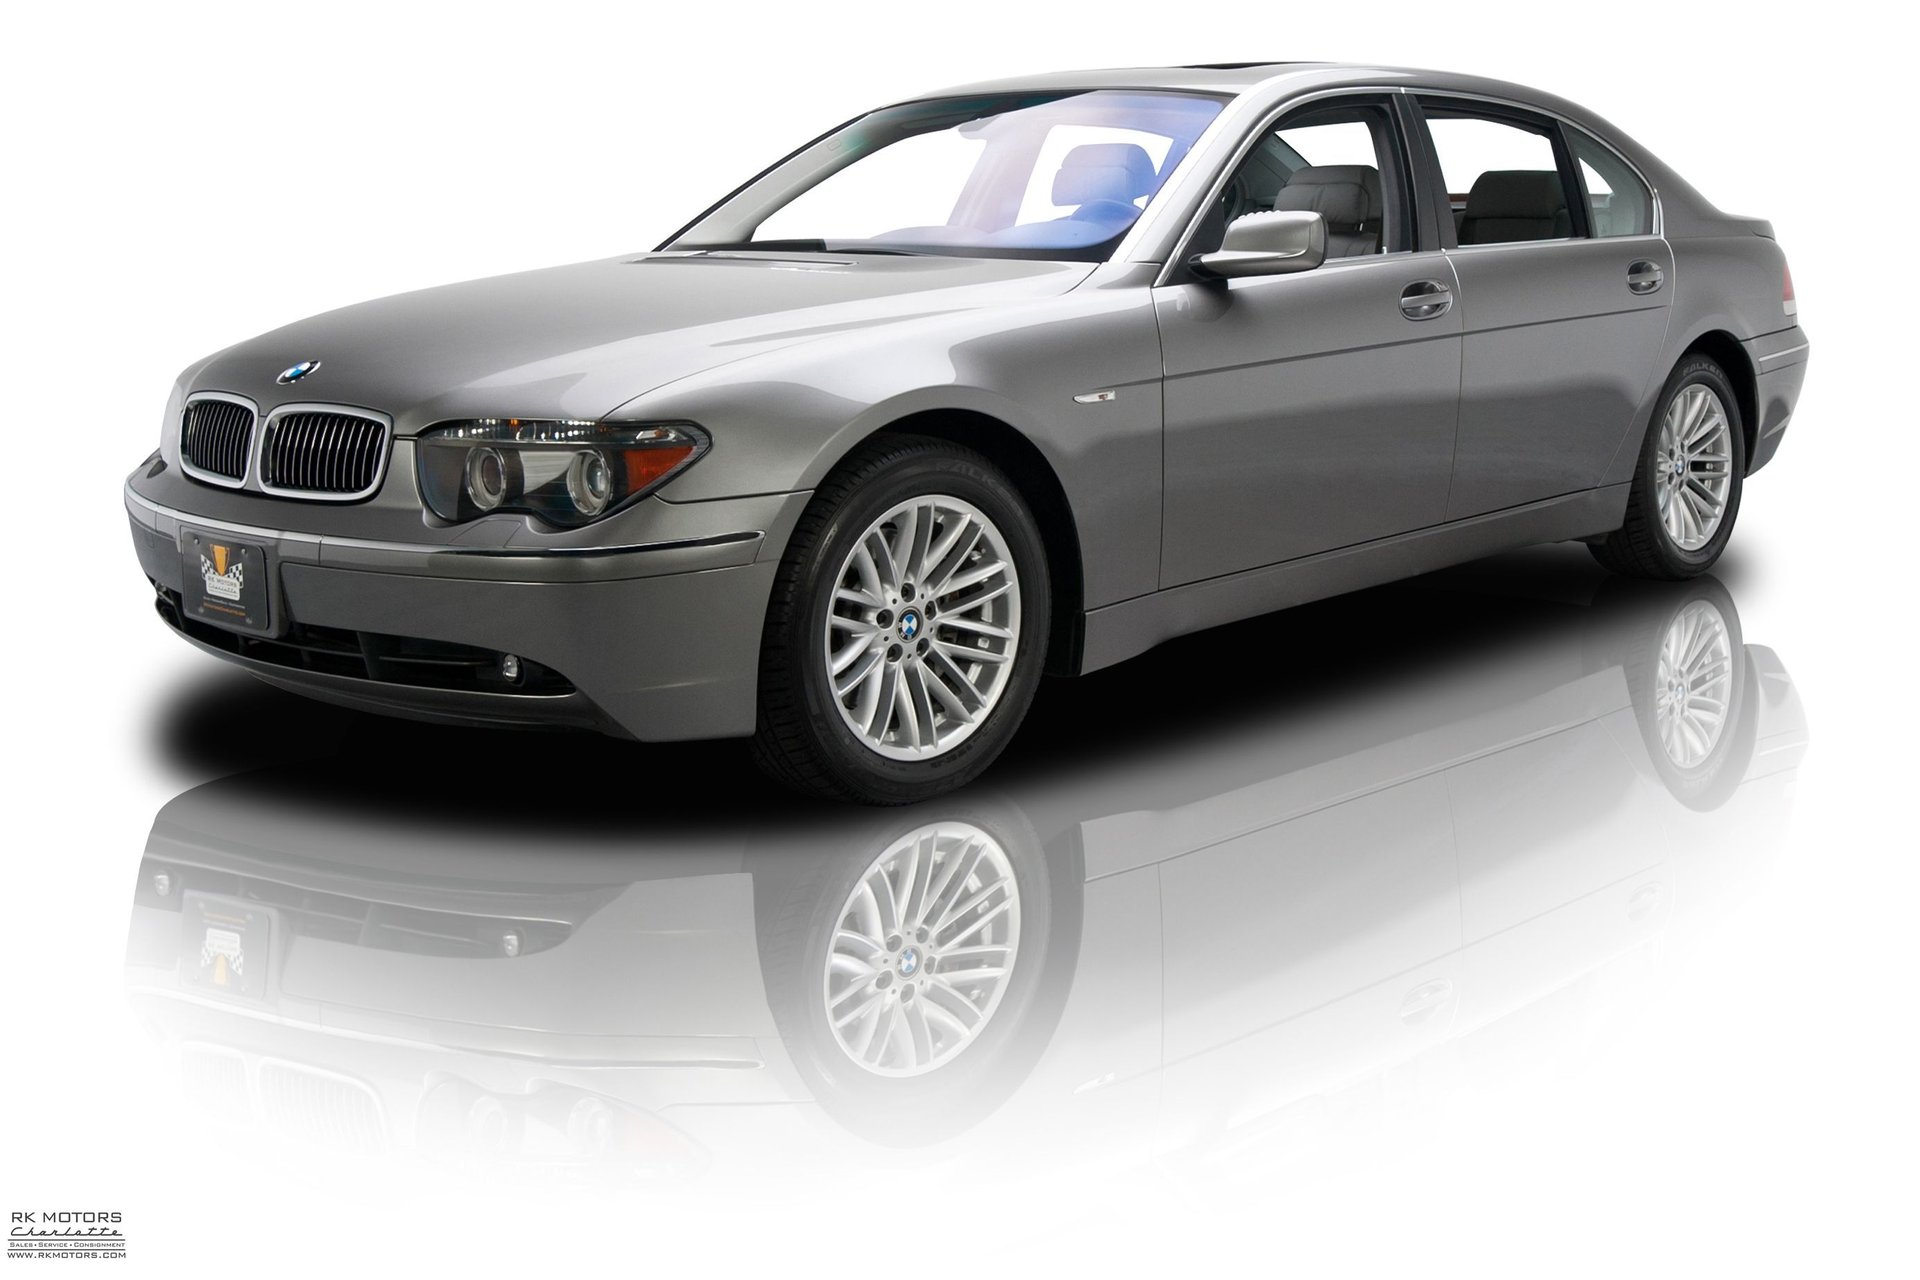 134154 2004 BMW 745li RK Motors Classic Cars and Muscle Cars for Sale